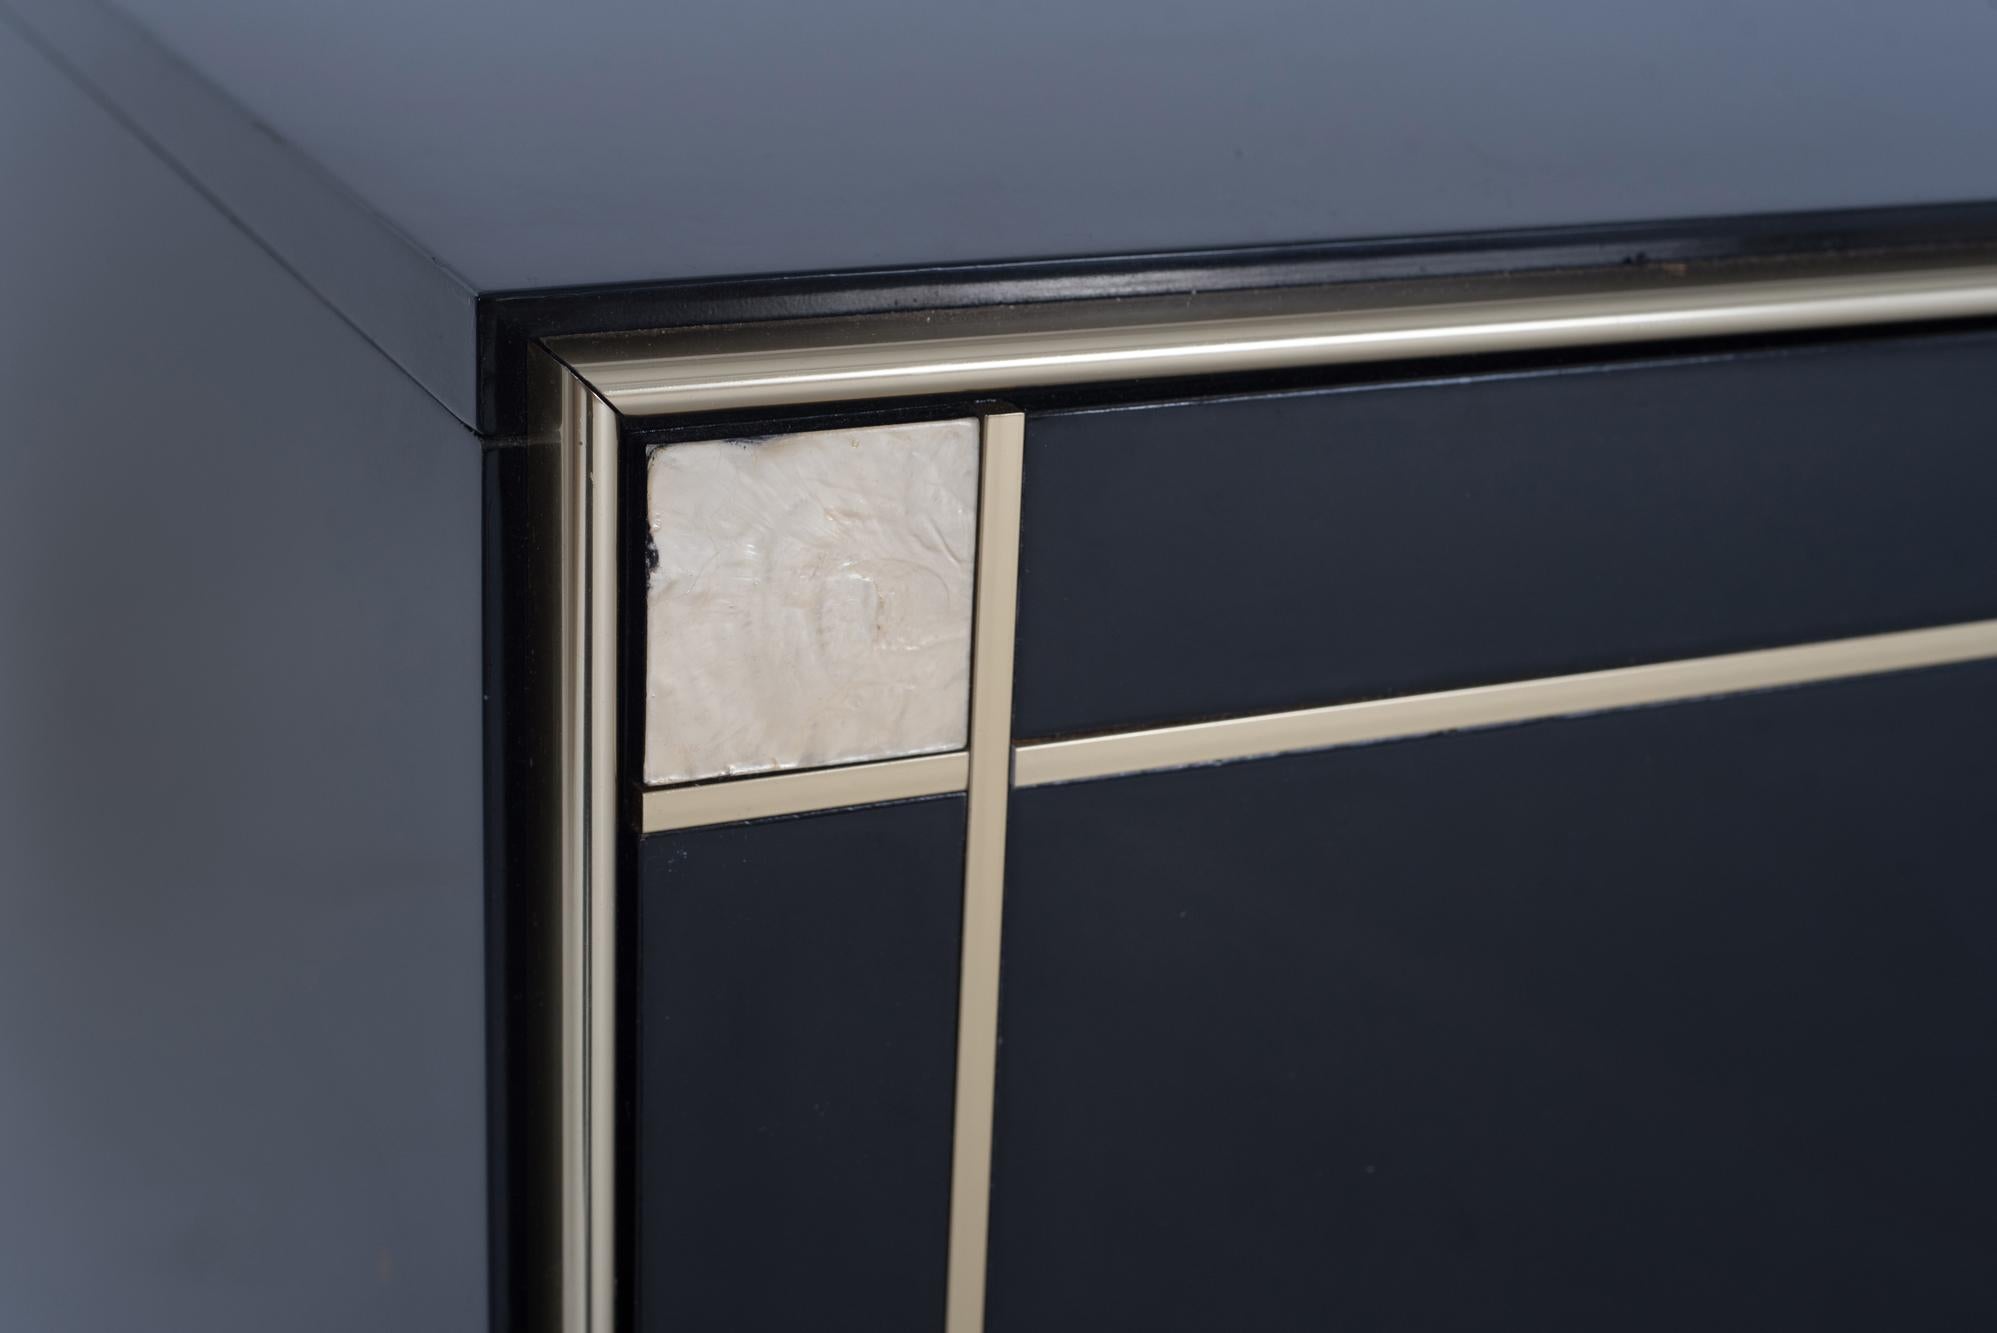 Pierre Cardin Black Lacquered Sideboard with Brass Details, 1980s 2